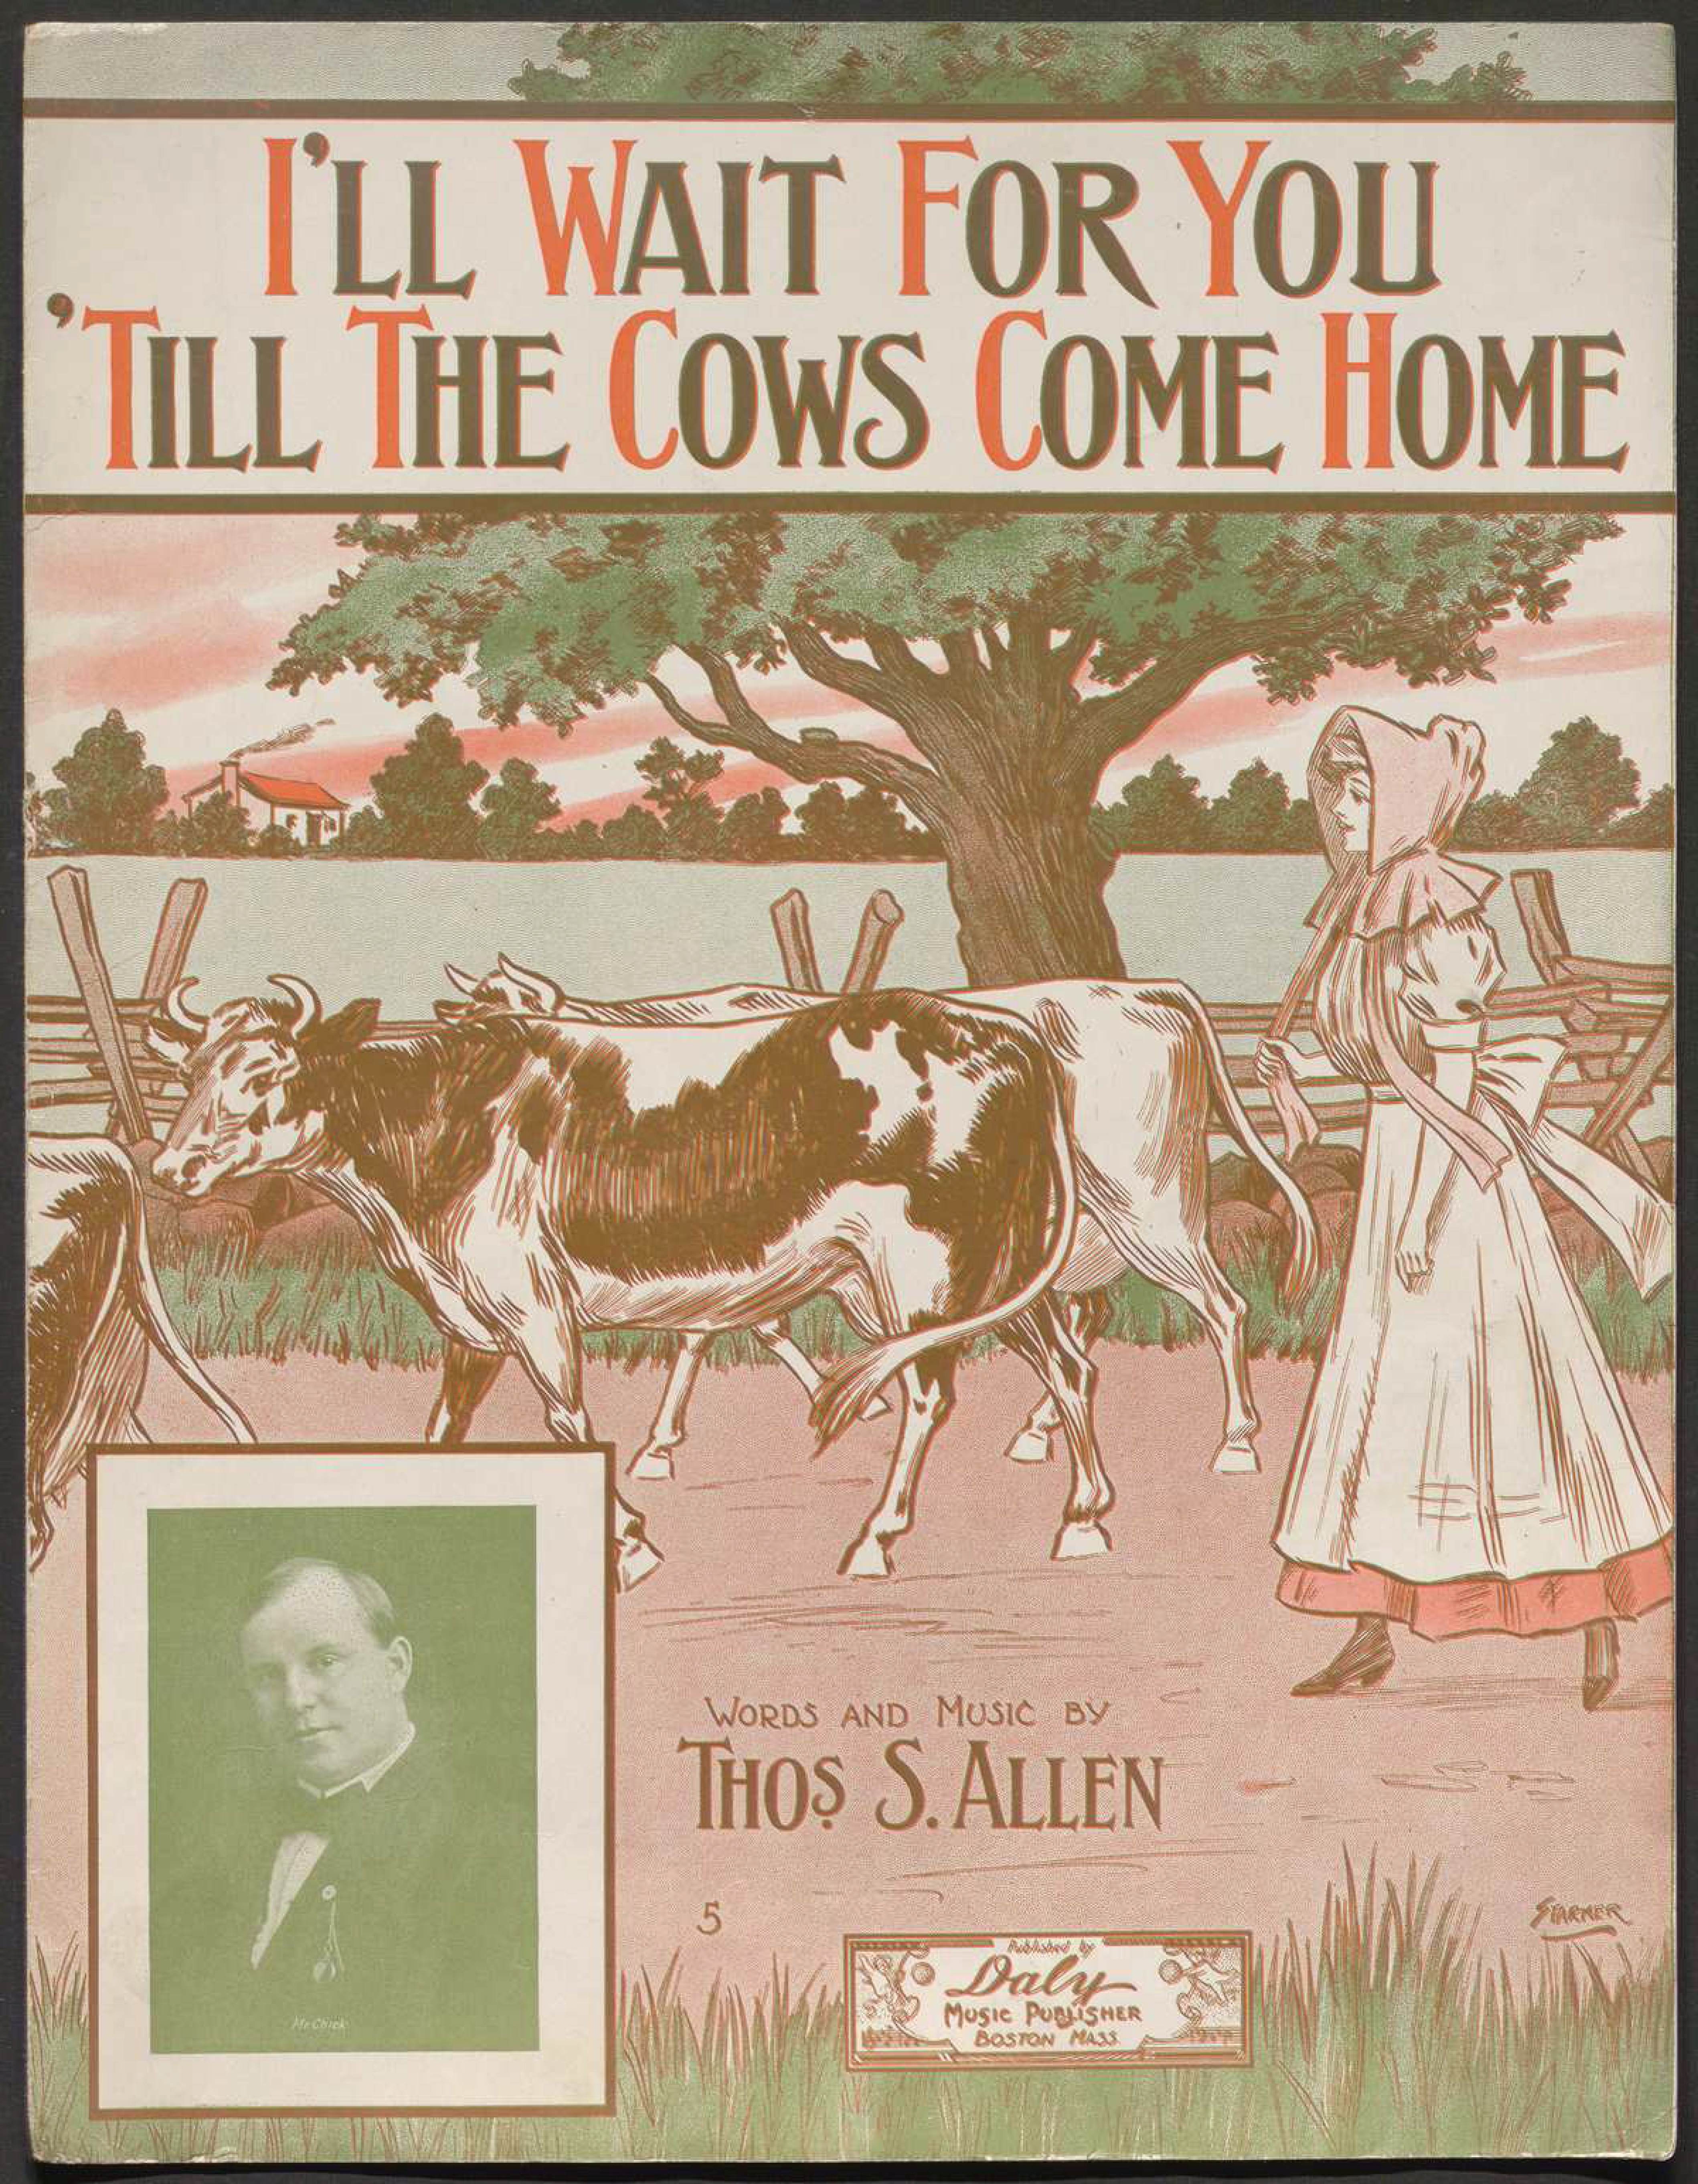 Cover to sheet music titled "I'll Wait For You 'till the Cows Come Home". Color illustration of a  young woman walking with cows in a rural landscape.